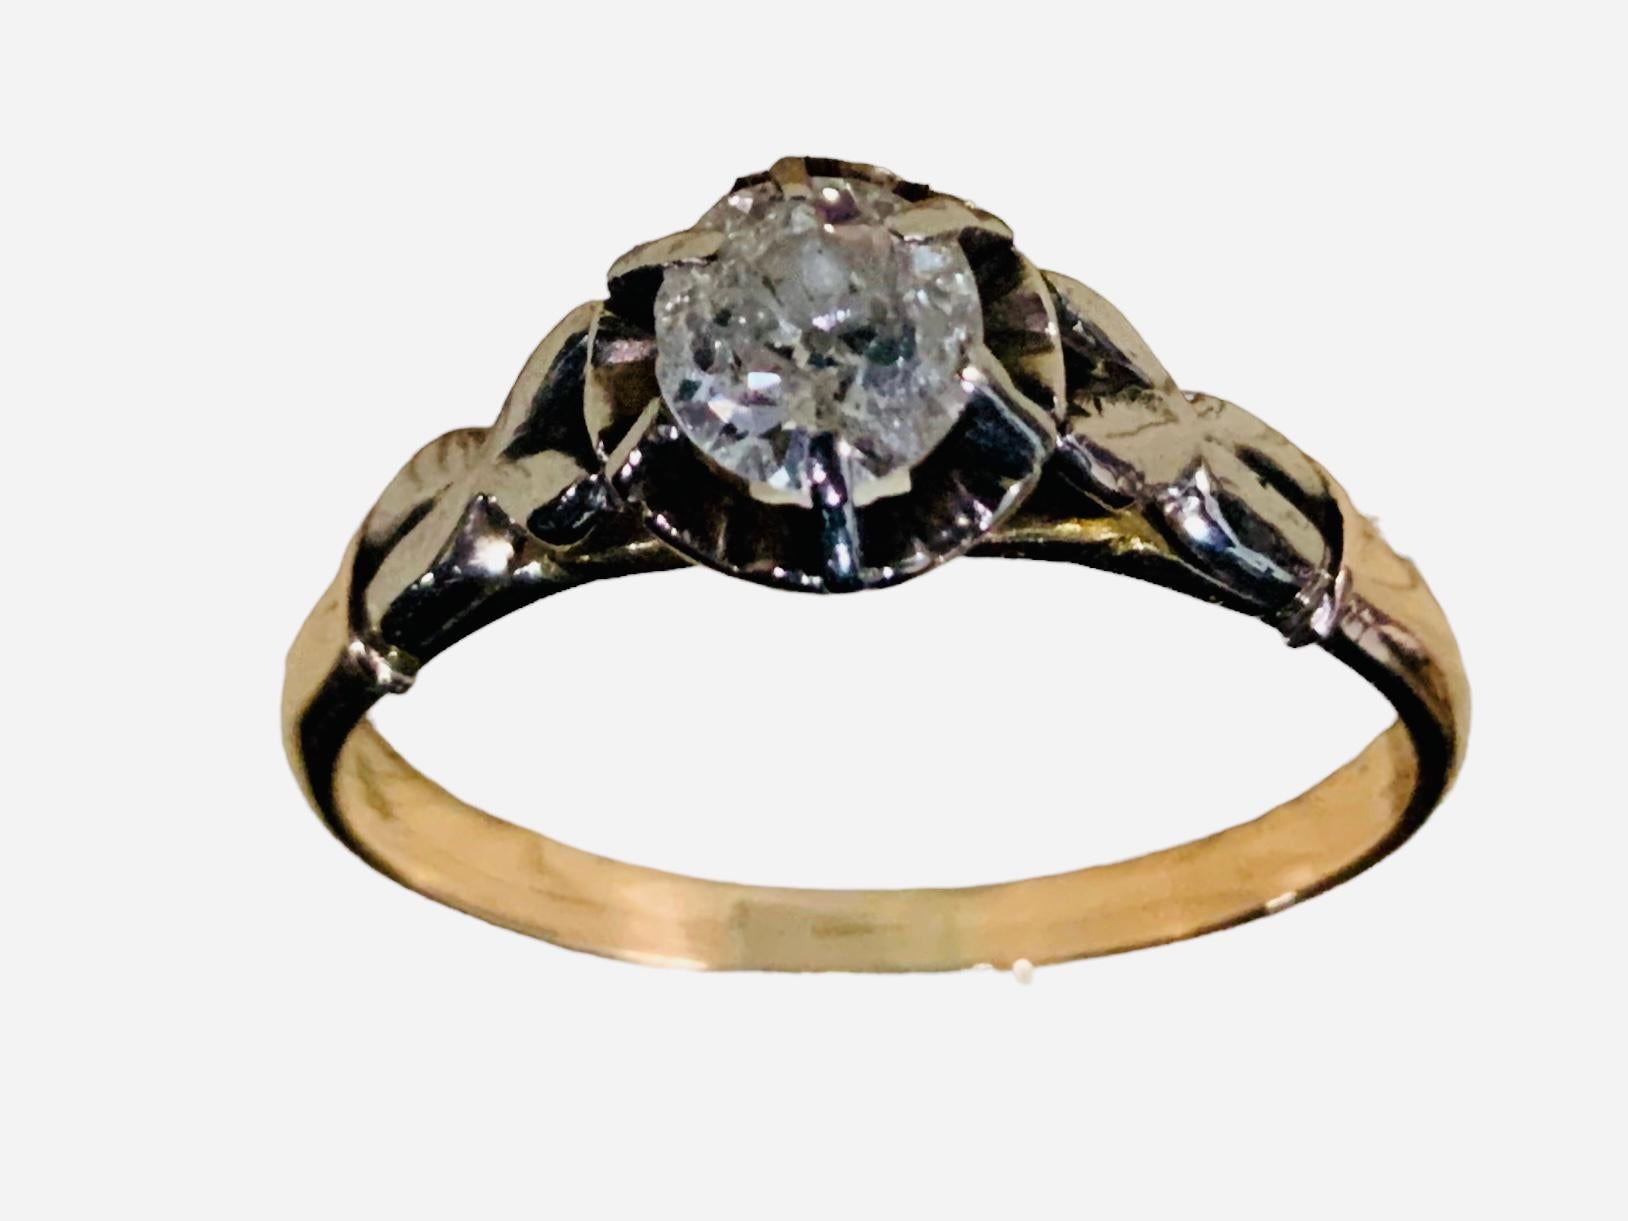 This is an early 19th century engagement ring that contains an Old mine cut diamond ( Weight-0.60 carats; in diameter; Color- G-H, Clarity- ?) mounted in white gold prong setting with a gallery decorated by two hearts in the front and two in the